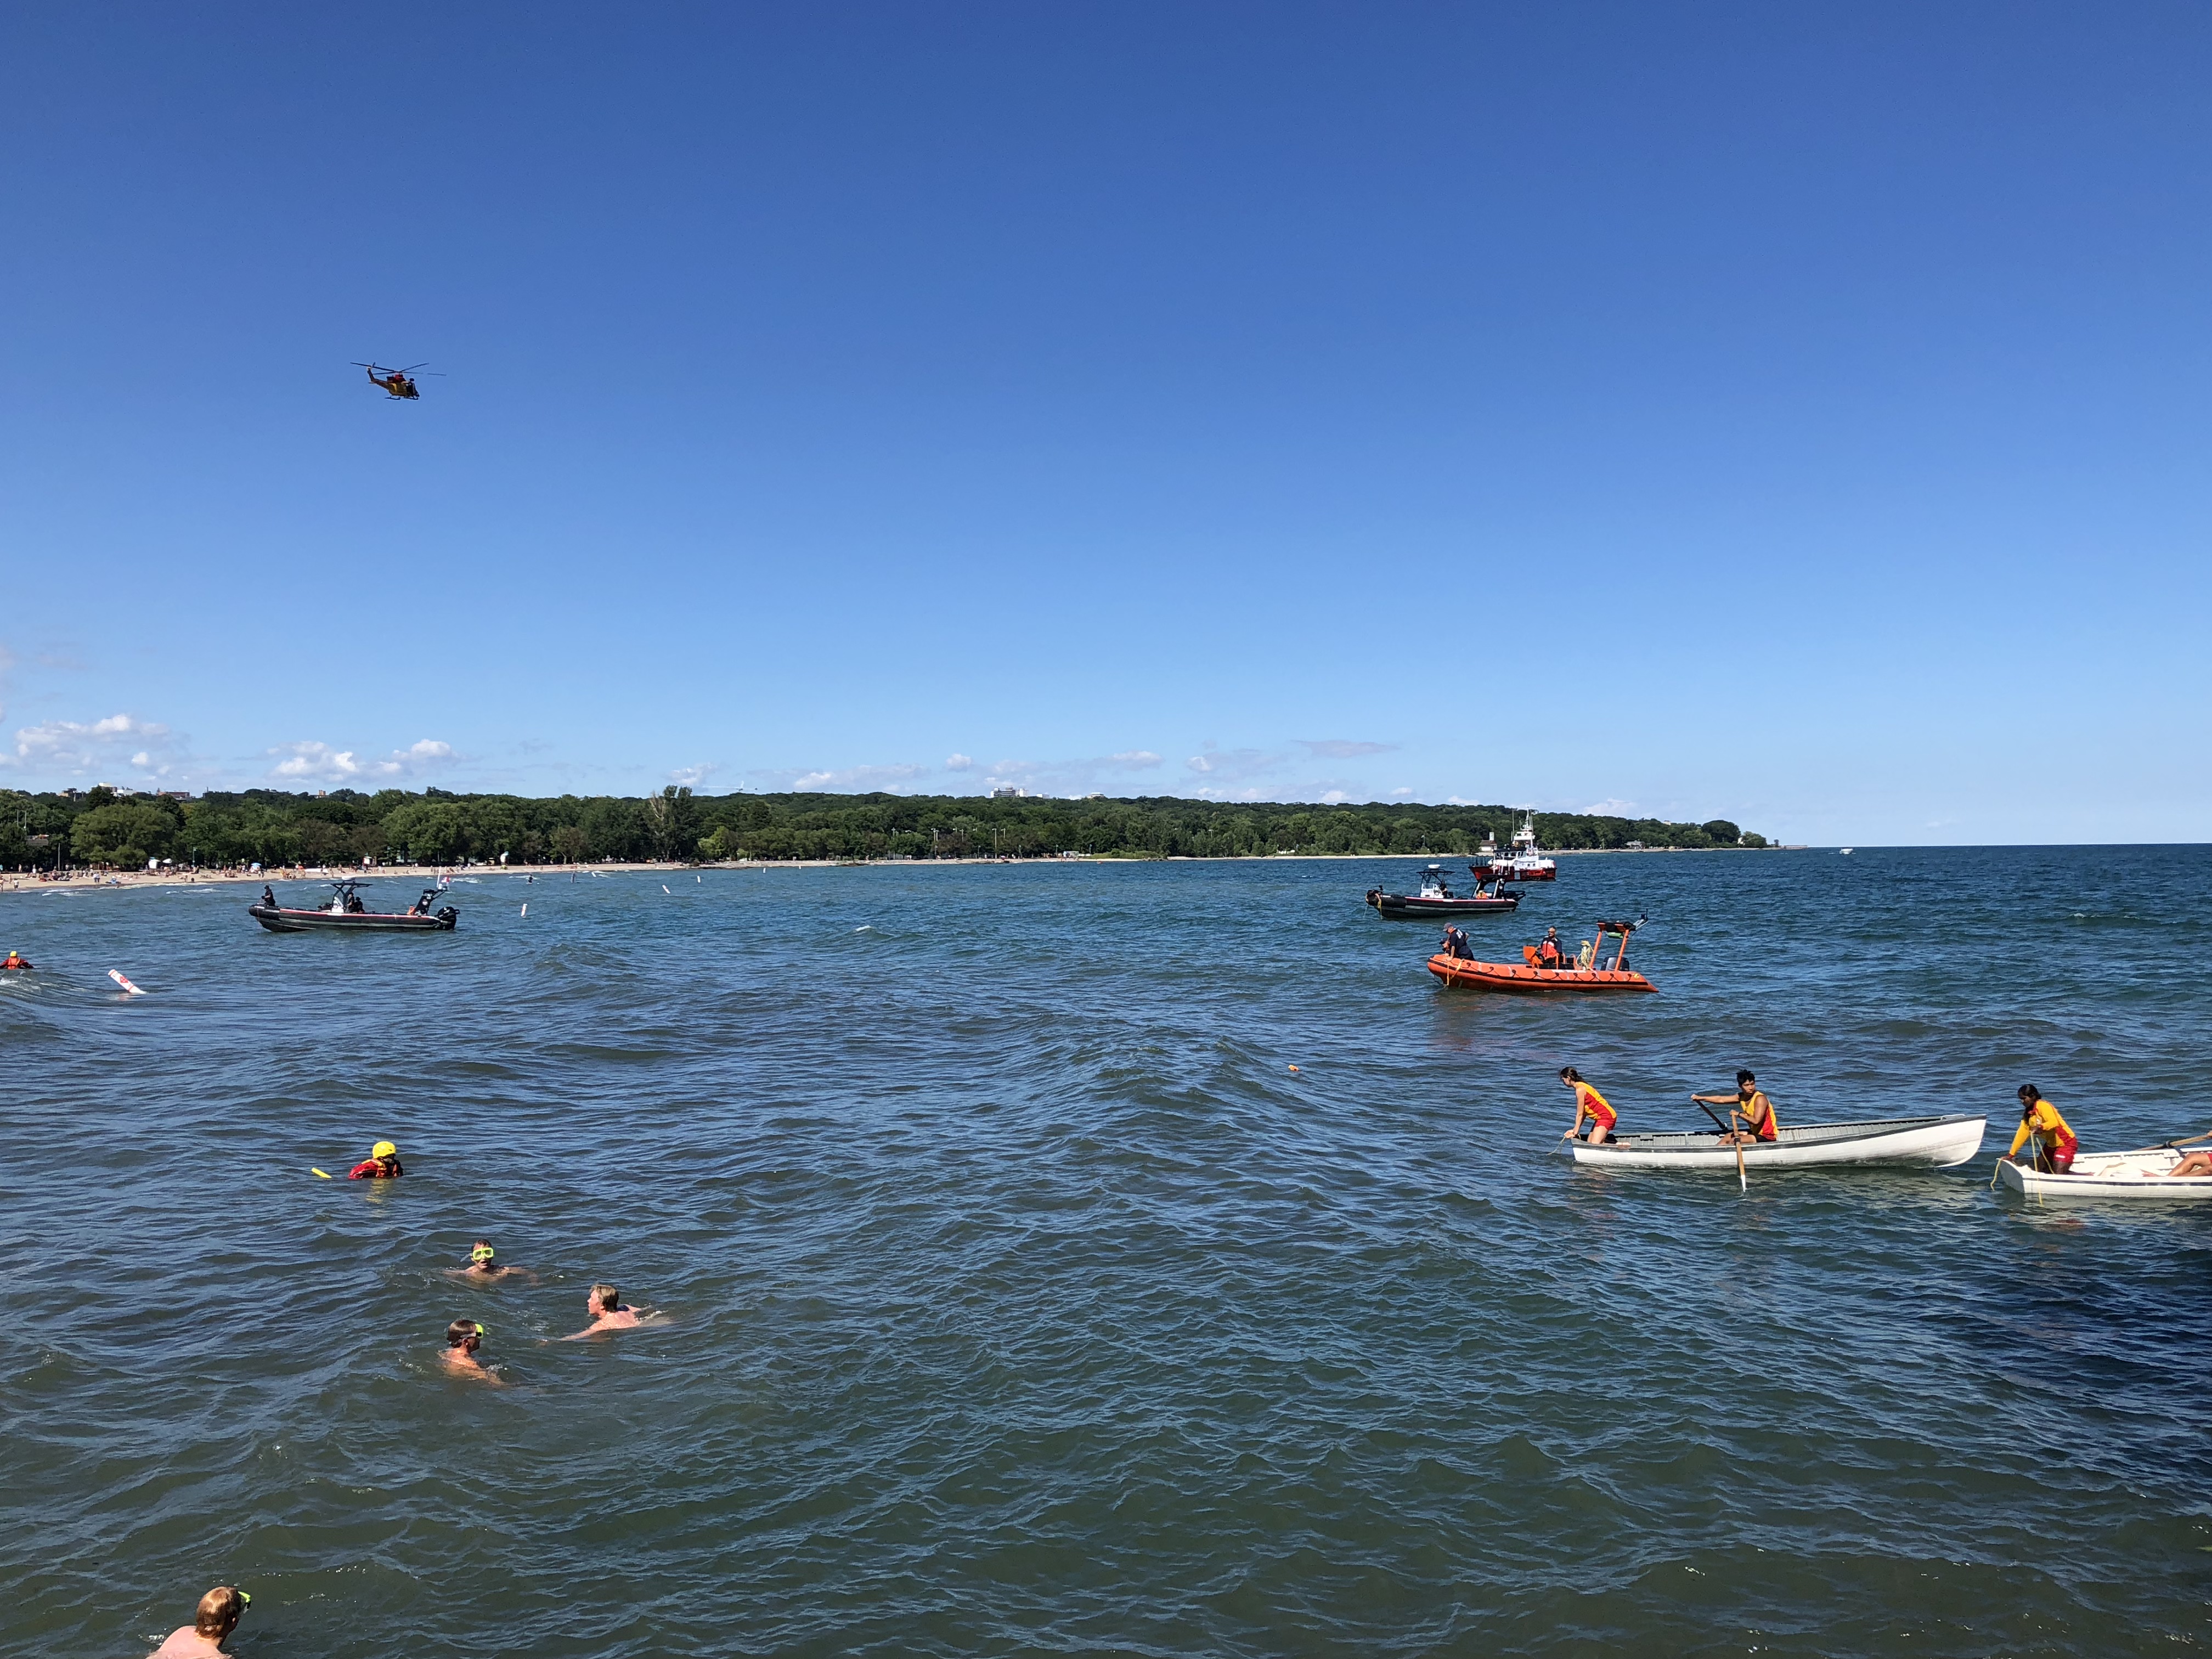 Rescue boats are seen in Lake Ontario during a rescue off Woodbine Beach on Aug. 10, 2018. CITYNEWS/John Hanley